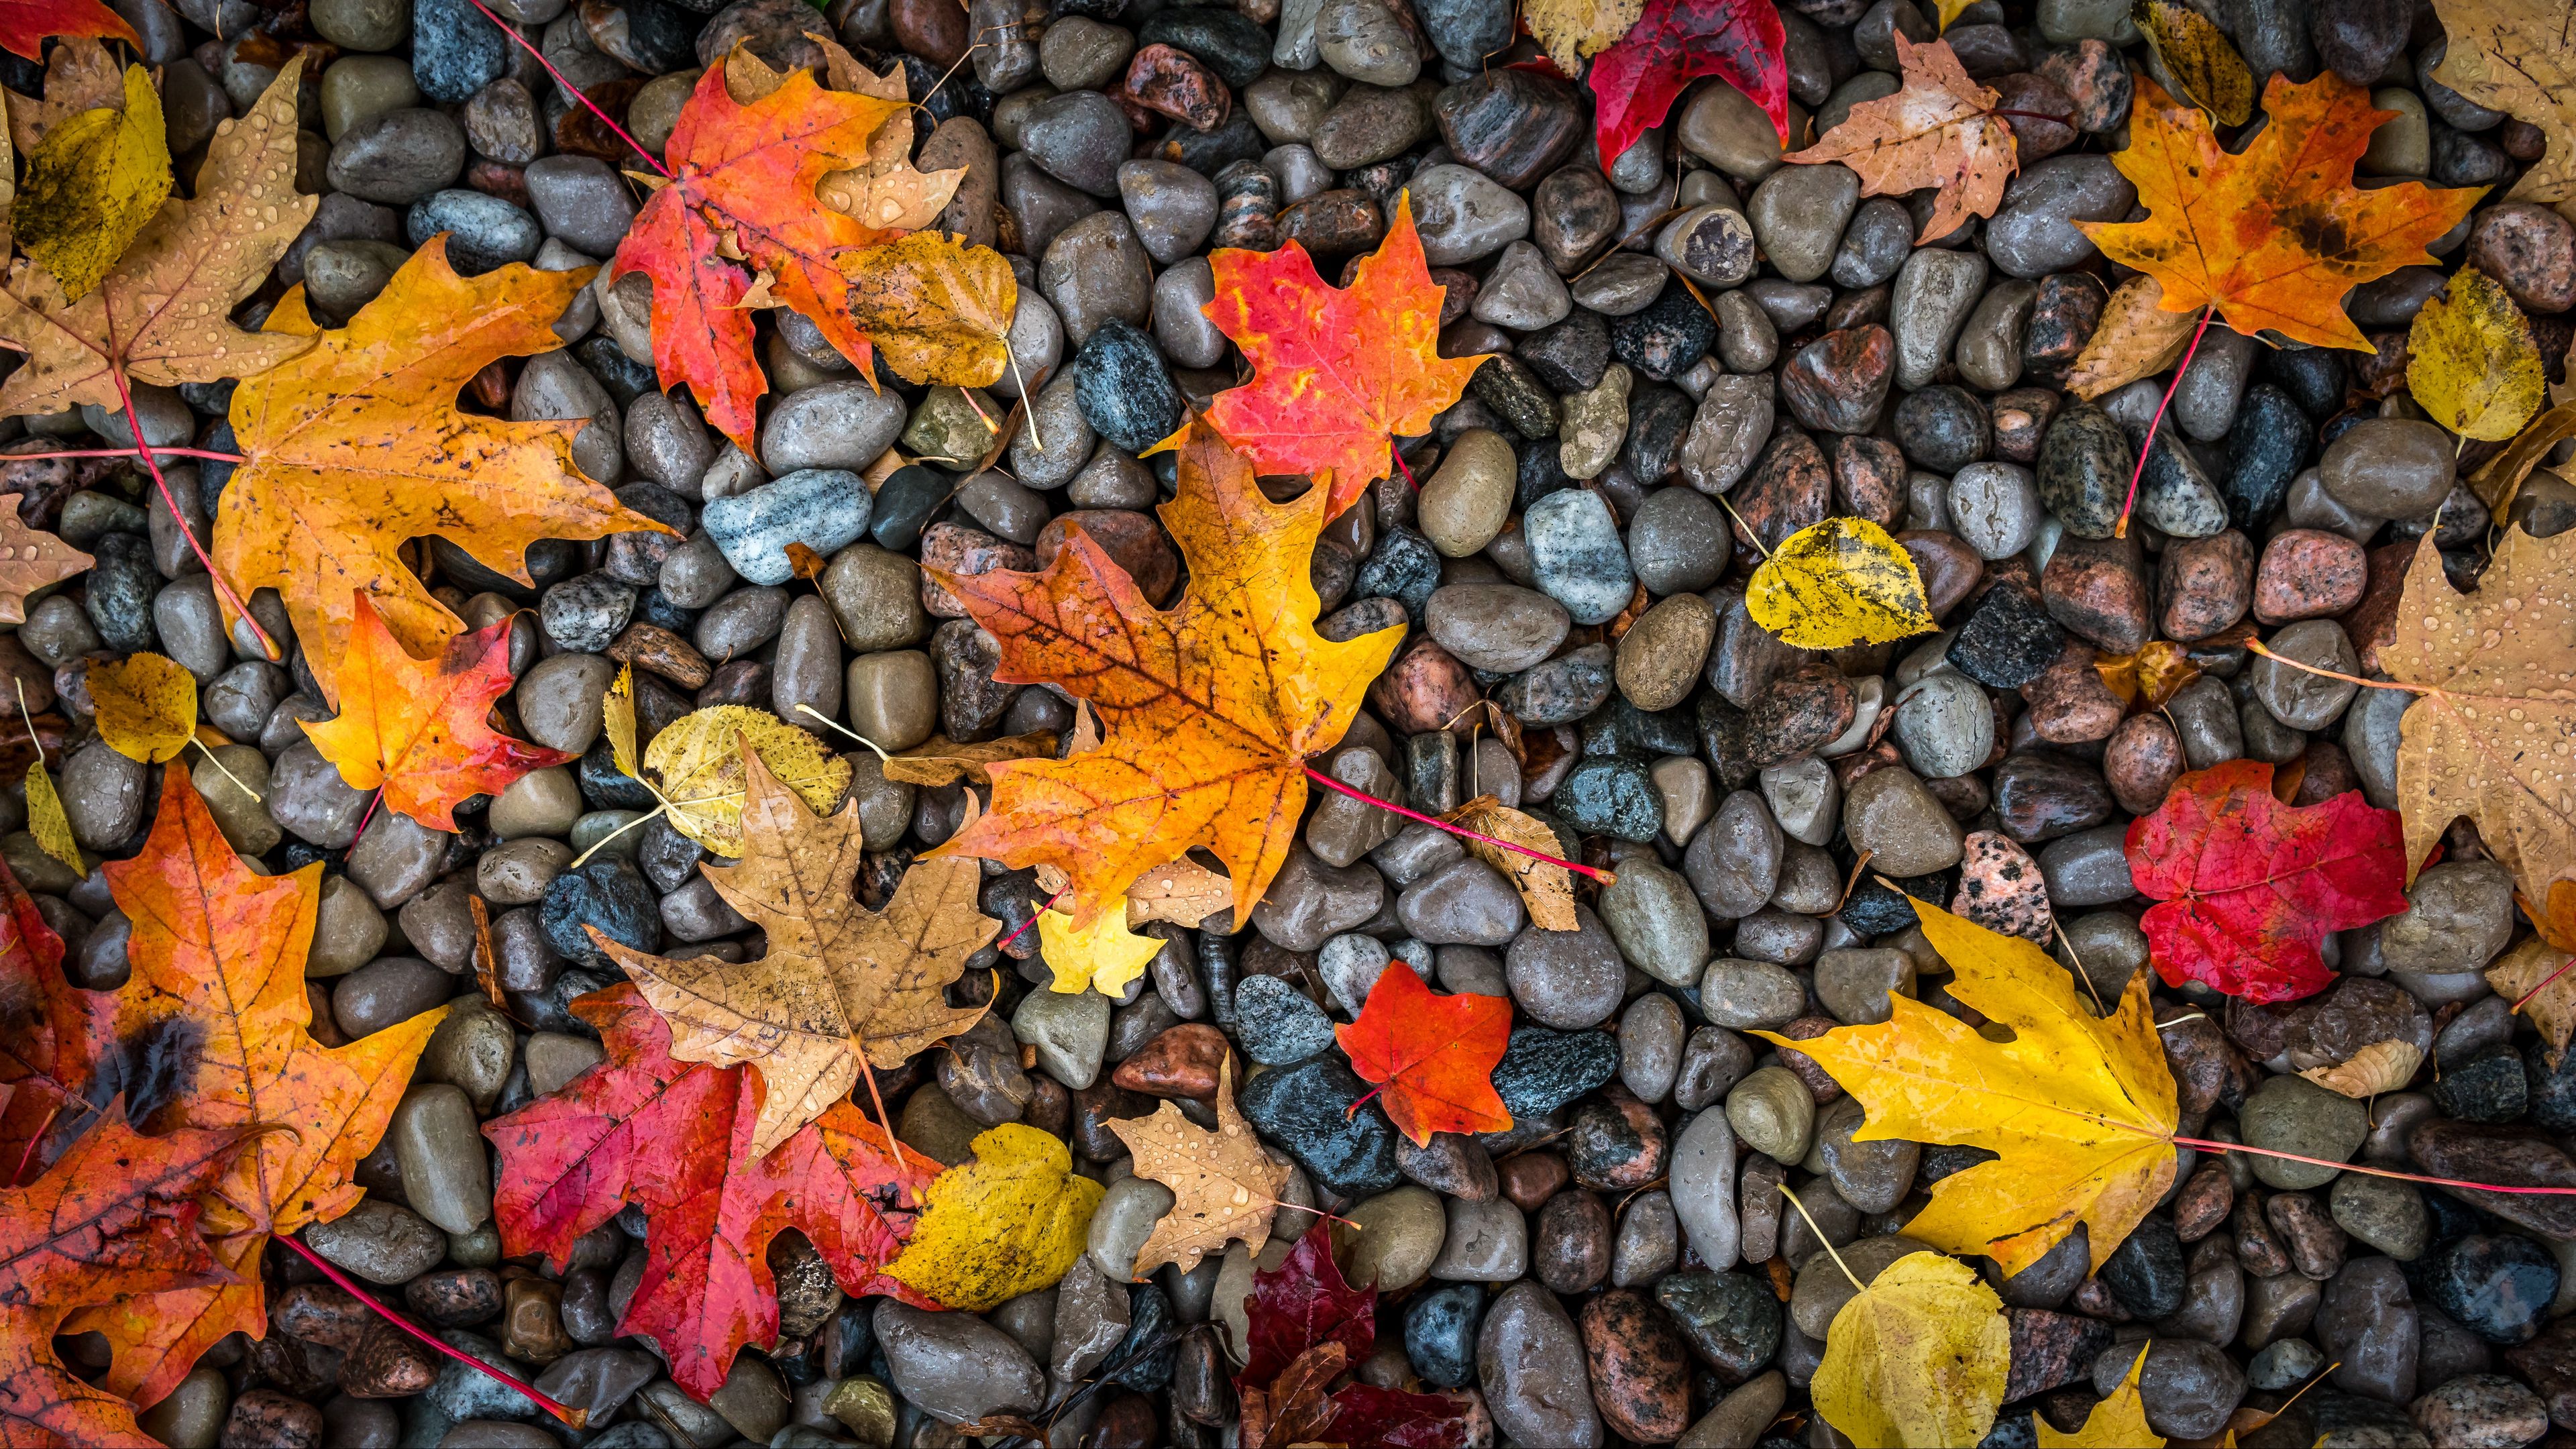 Download wallpaper 3840x2160 leaves, stones, maple, wet, autumn 4k uhd 16:9 HD background